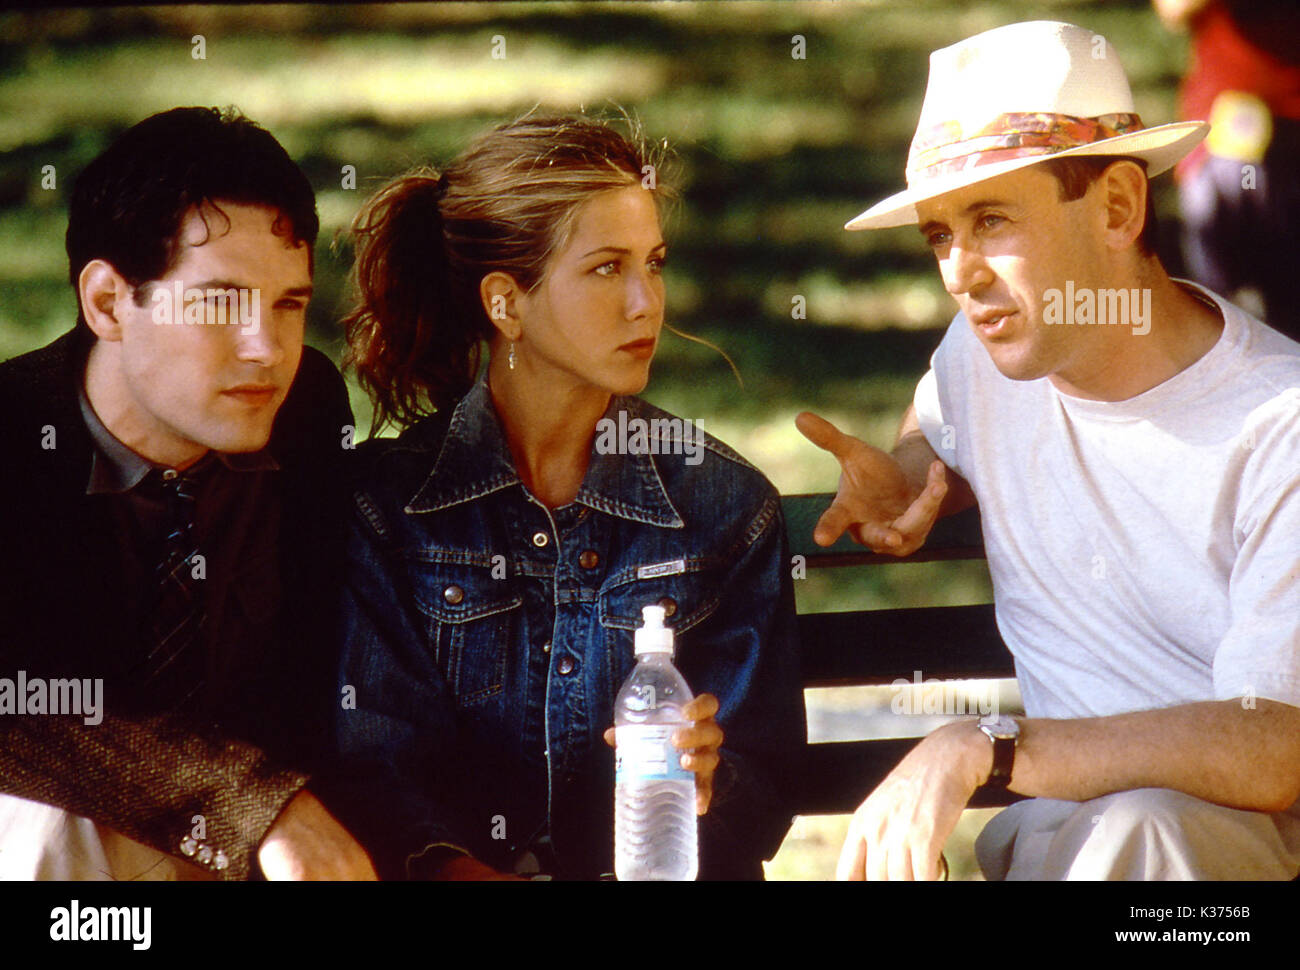 THE OBJECT OF MY AFFECTION PAUL RUDD, JENNIFER ANISTON AND DIRECTOR, NICHOLAS HYTNER       Date: 1998 Stock Photo